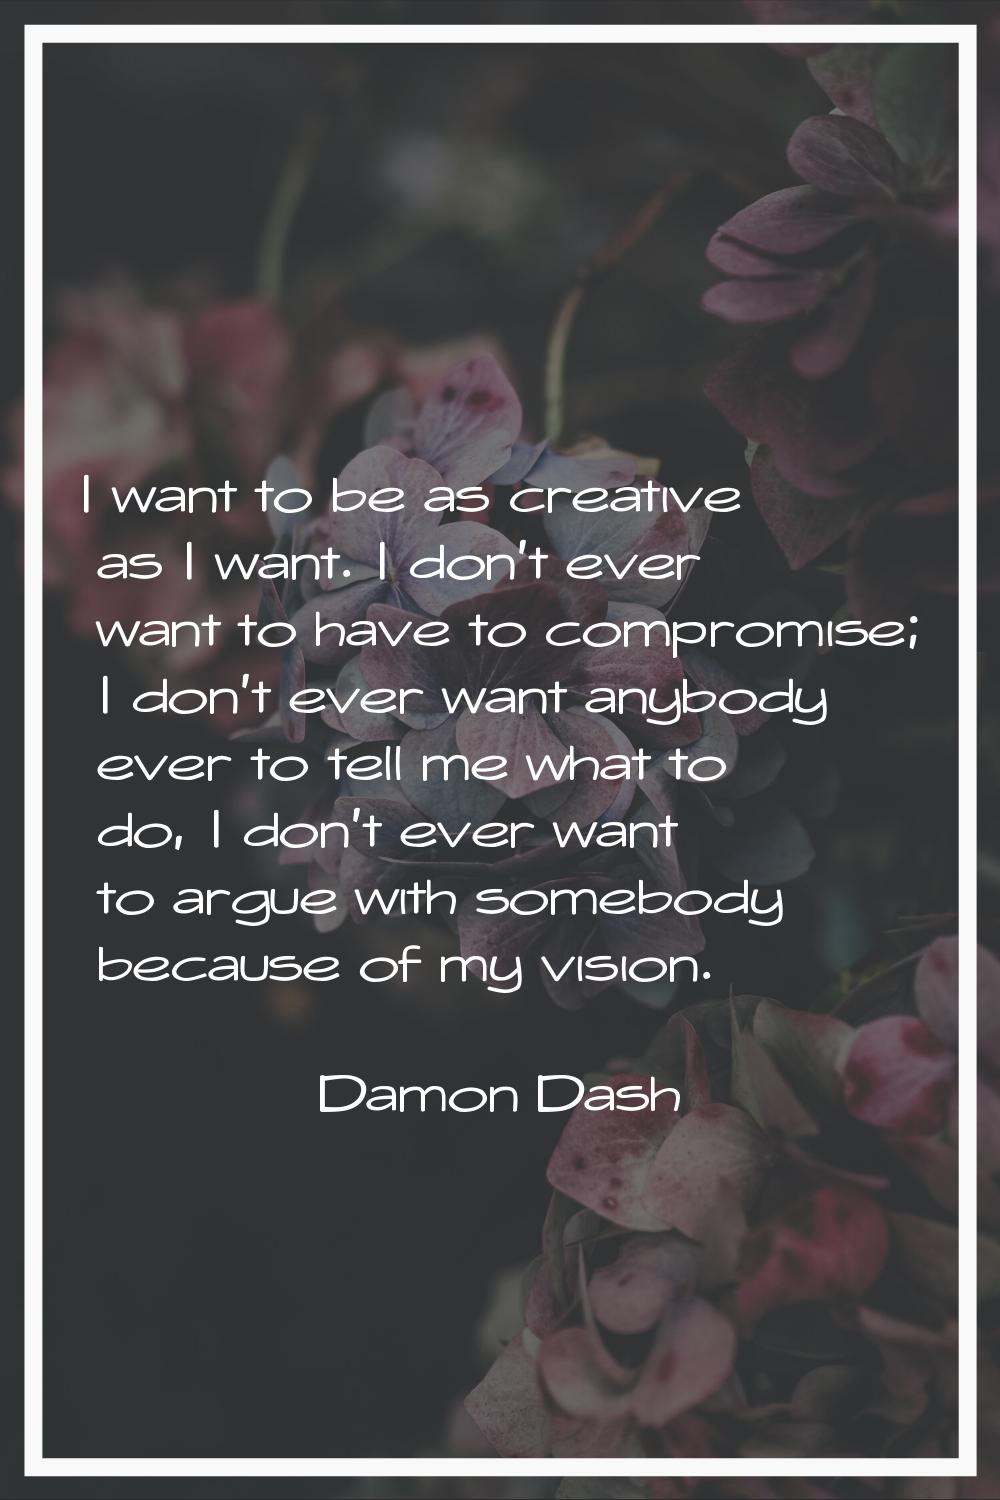 I want to be as creative as I want. I don't ever want to have to compromise; I don't ever want anyb